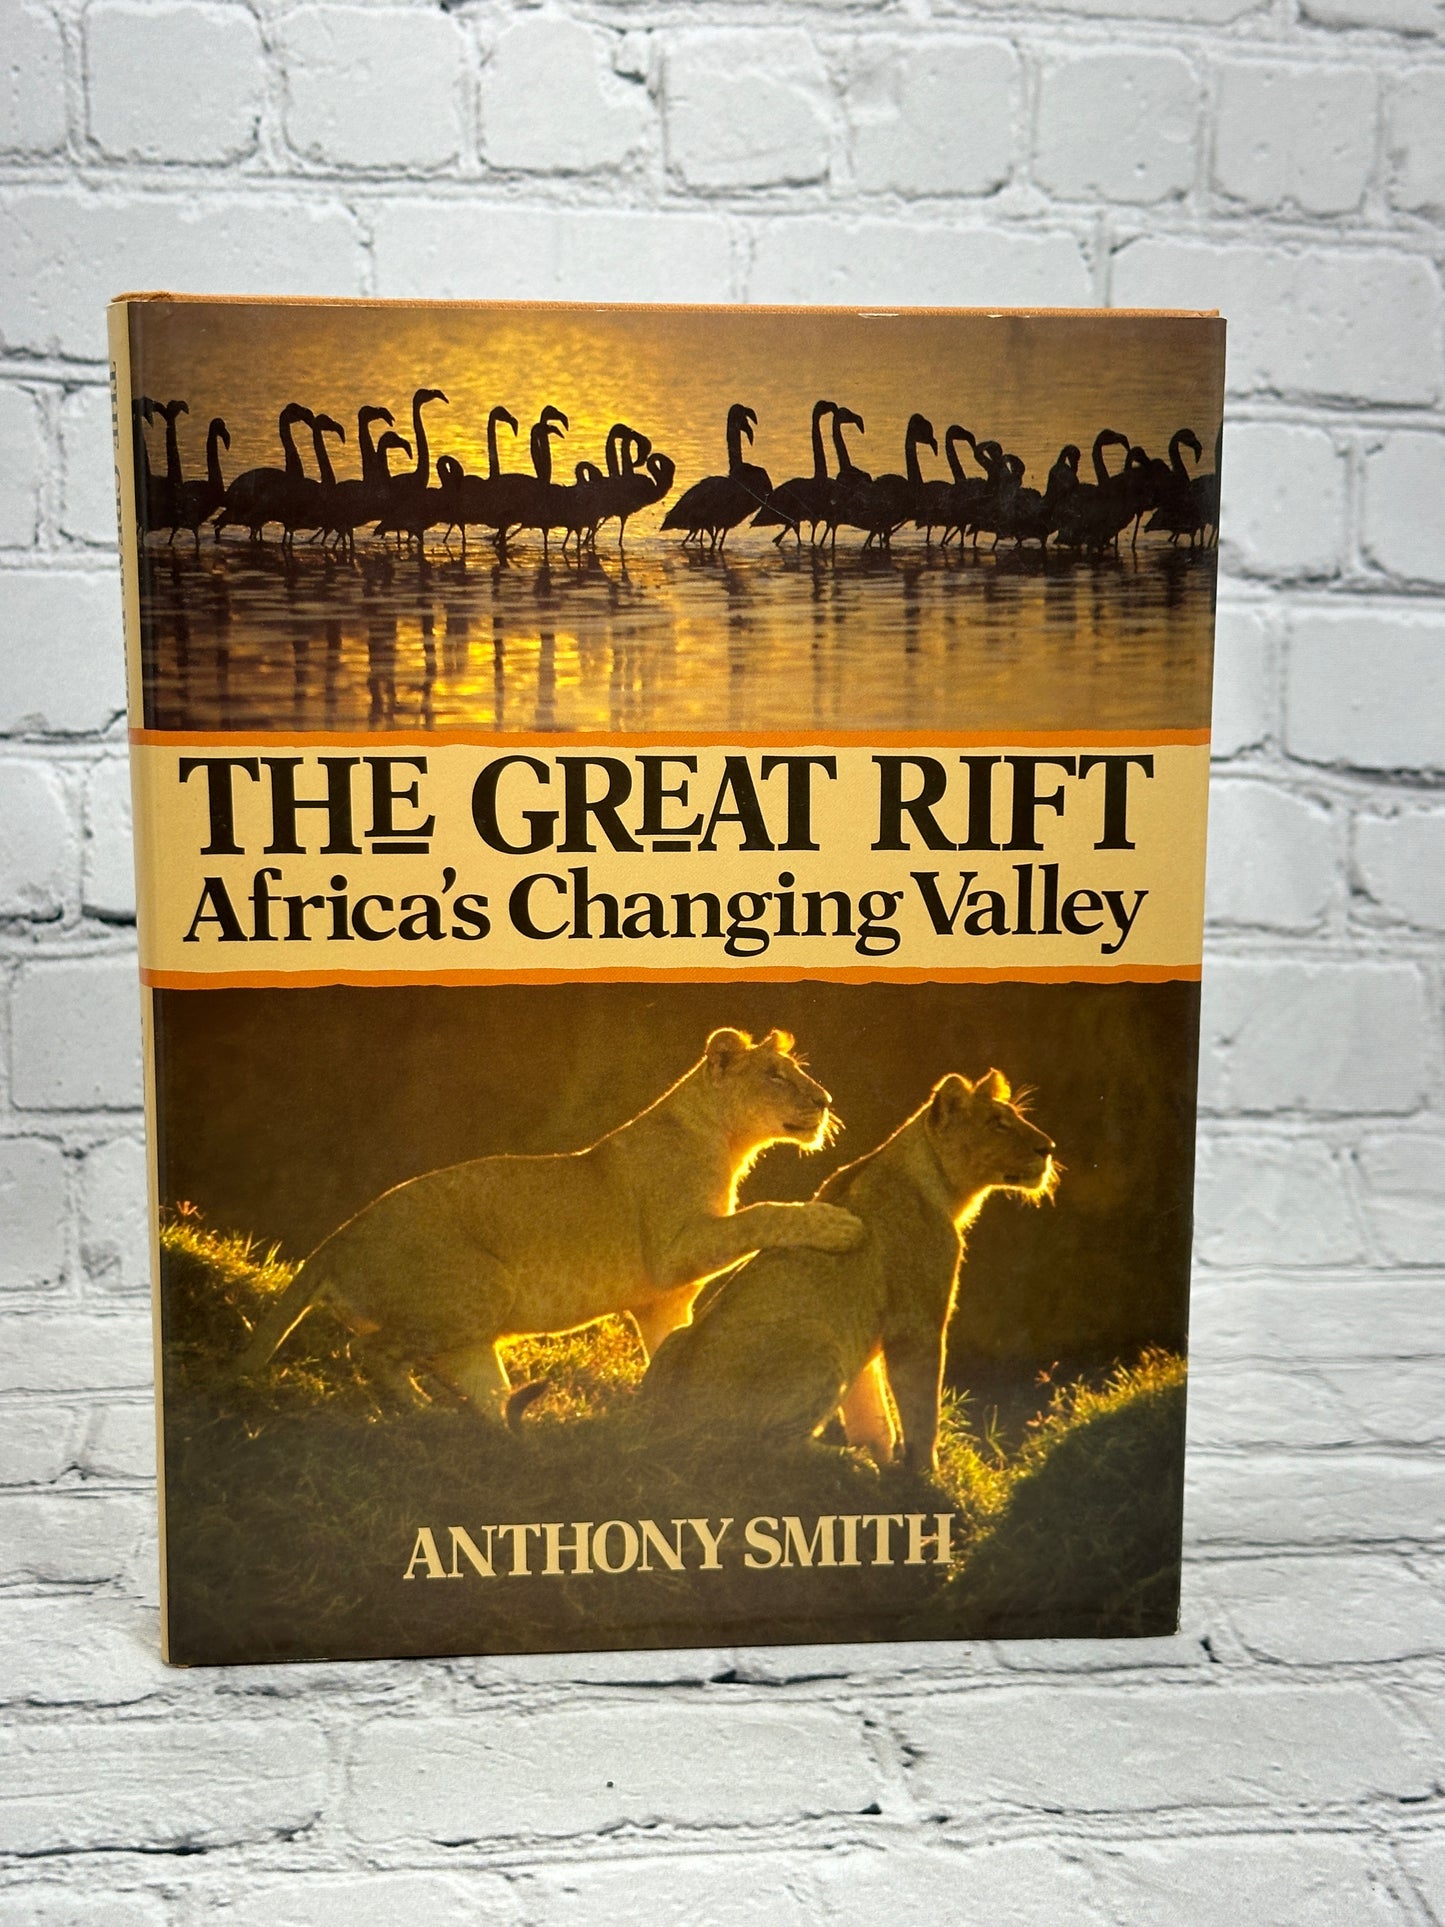 The Great Rift: Africa's Changing Valley By Anthony Smith [1988]